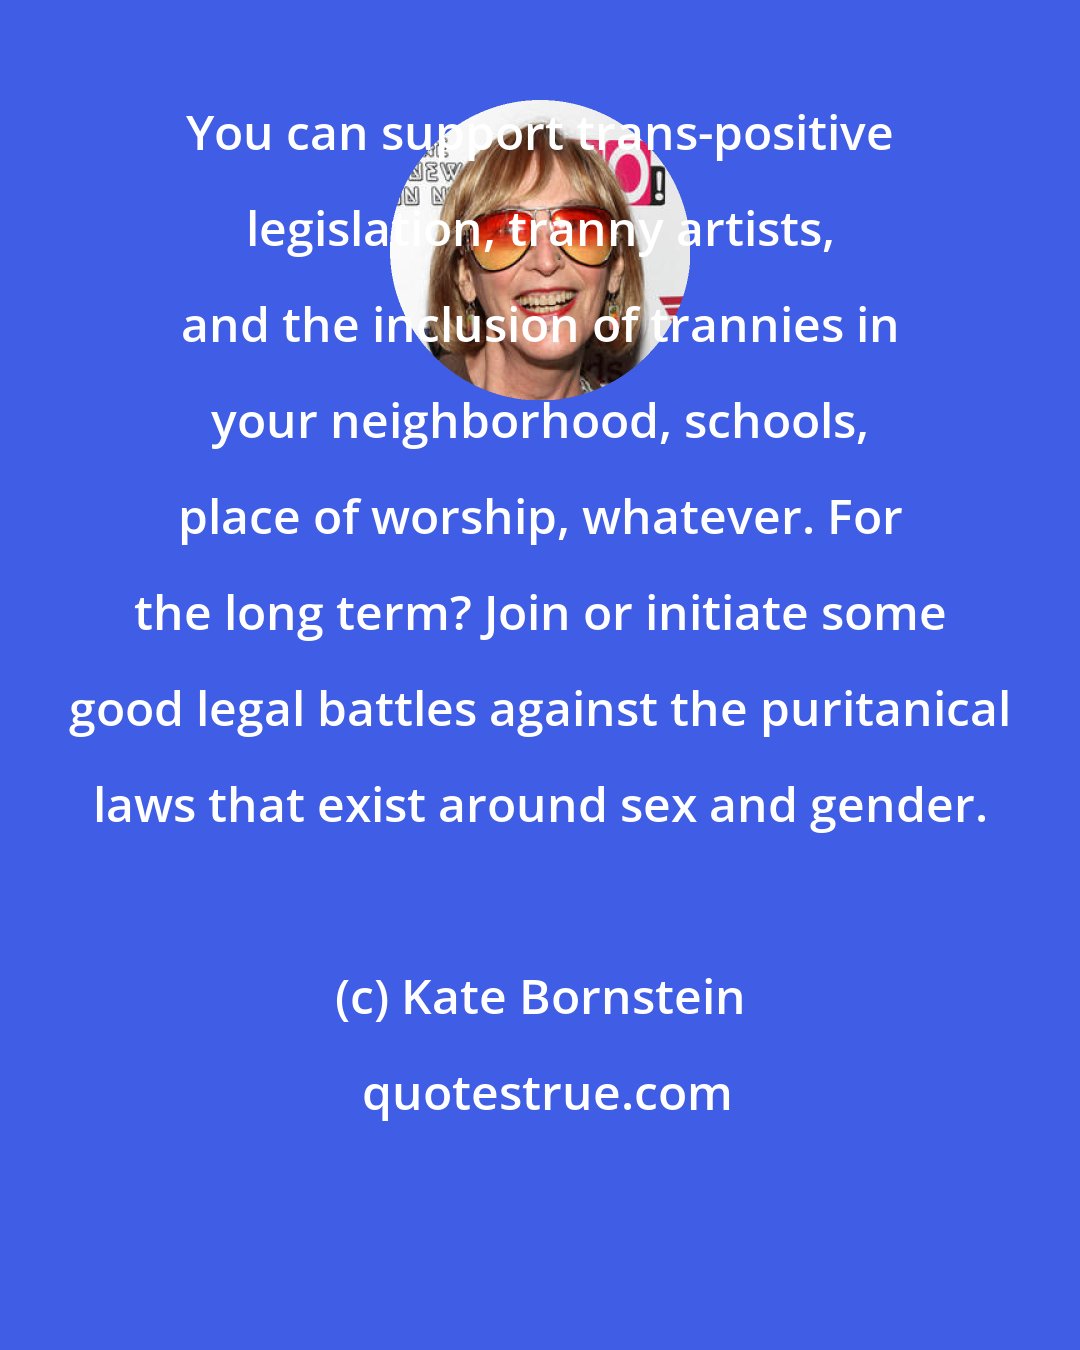 Kate Bornstein: You can support trans-positive legislation, tranny artists, and the inclusion of trannies in your neighborhood, schools, place of worship, whatever. For the long term? Join or initiate some good legal battles against the puritanical laws that exist around sex and gender.